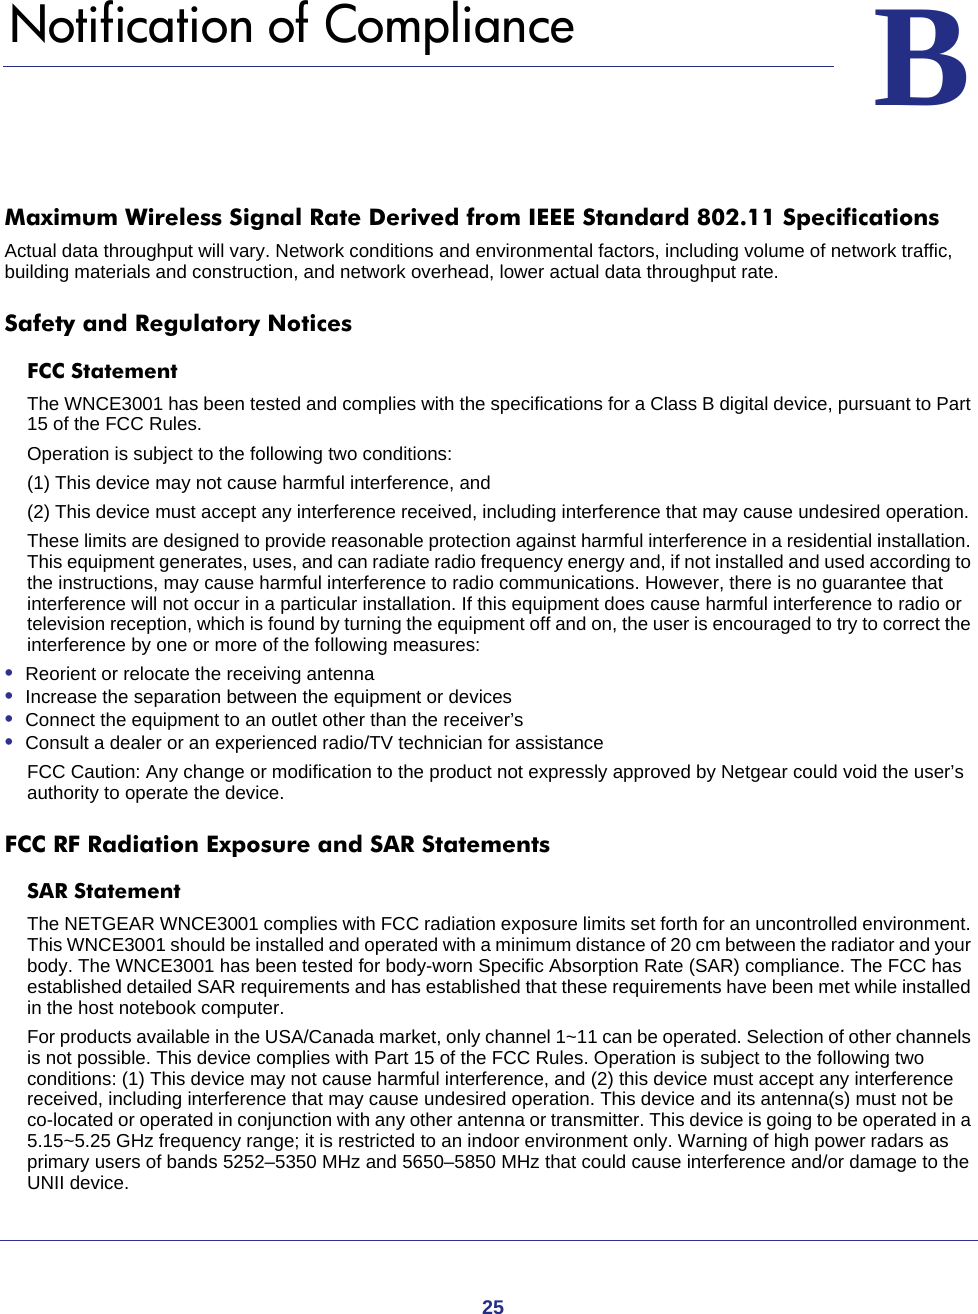 25BB.   Notification of ComplianceMaximum Wireless Signal Rate Derived from IEEE Standard 802.11 SpecificationsActual data throughput will vary. Network conditions and environmental factors, including volume of network traffic, building materials and construction, and network overhead, lower actual data throughput rate.Safety and Regulatory NoticesFCC Statement The WNCE3001 has been tested and complies with the specifications for a Class B digital device, pursuant to Part 15 of the FCC Rules.Operation is subject to the following two conditions: (1) This device may not cause harmful interference, and (2) This device must accept any interference received, including interference that may cause undesired operation. These limits are designed to provide reasonable protection against harmful interference in a residential installation. This equipment generates, uses, and can radiate radio frequency energy and, if not installed and used according to the instructions, may cause harmful interference to radio communications. However, there is no guarantee that interference will not occur in a particular installation. If this equipment does cause harmful interference to radio or television reception, which is found by turning the equipment off and on, the user is encouraged to try to correct the interference by one or more of the following measures:•  Reorient or relocate the receiving antenna •  Increase the separation between the equipment or devices •  Connect the equipment to an outlet other than the receiver’s •  Consult a dealer or an experienced radio/TV technician for assistanceFCC Caution: Any change or modification to the product not expressly approved by Netgear could void the user’s authority to operate the device.FCC RF Radiation Exposure and SAR StatementsSAR Statement The NETGEAR WNCE3001 complies with FCC radiation exposure limits set forth for an uncontrolled environment. This WNCE3001 should be installed and operated with a minimum distance of 20 cm between the radiator and your body. The WNCE3001 has been tested for body-worn Specific Absorption Rate (SAR) compliance. The FCC has established detailed SAR requirements and has established that these requirements have been met while installed in the host notebook computer. For products available in the USA/Canada market, only channel 1~11 can be operated. Selection of other channels is not possible. This device complies with Part 15 of the FCC Rules. Operation is subject to the following two conditions: (1) This device may not cause harmful interference, and (2) this device must accept any interference received, including interference that may cause undesired operation. This device and its antenna(s) must not be co-located or operated in conjunction with any other antenna or transmitter. This device is going to be operated in a 5.15~5.25 GHz frequency range; it is restricted to an indoor environment only. Warning of high power radars as primary users of bands 5252–5350 MHz and 5650–5850 MHz that could cause interference and/or damage to the UNII device.